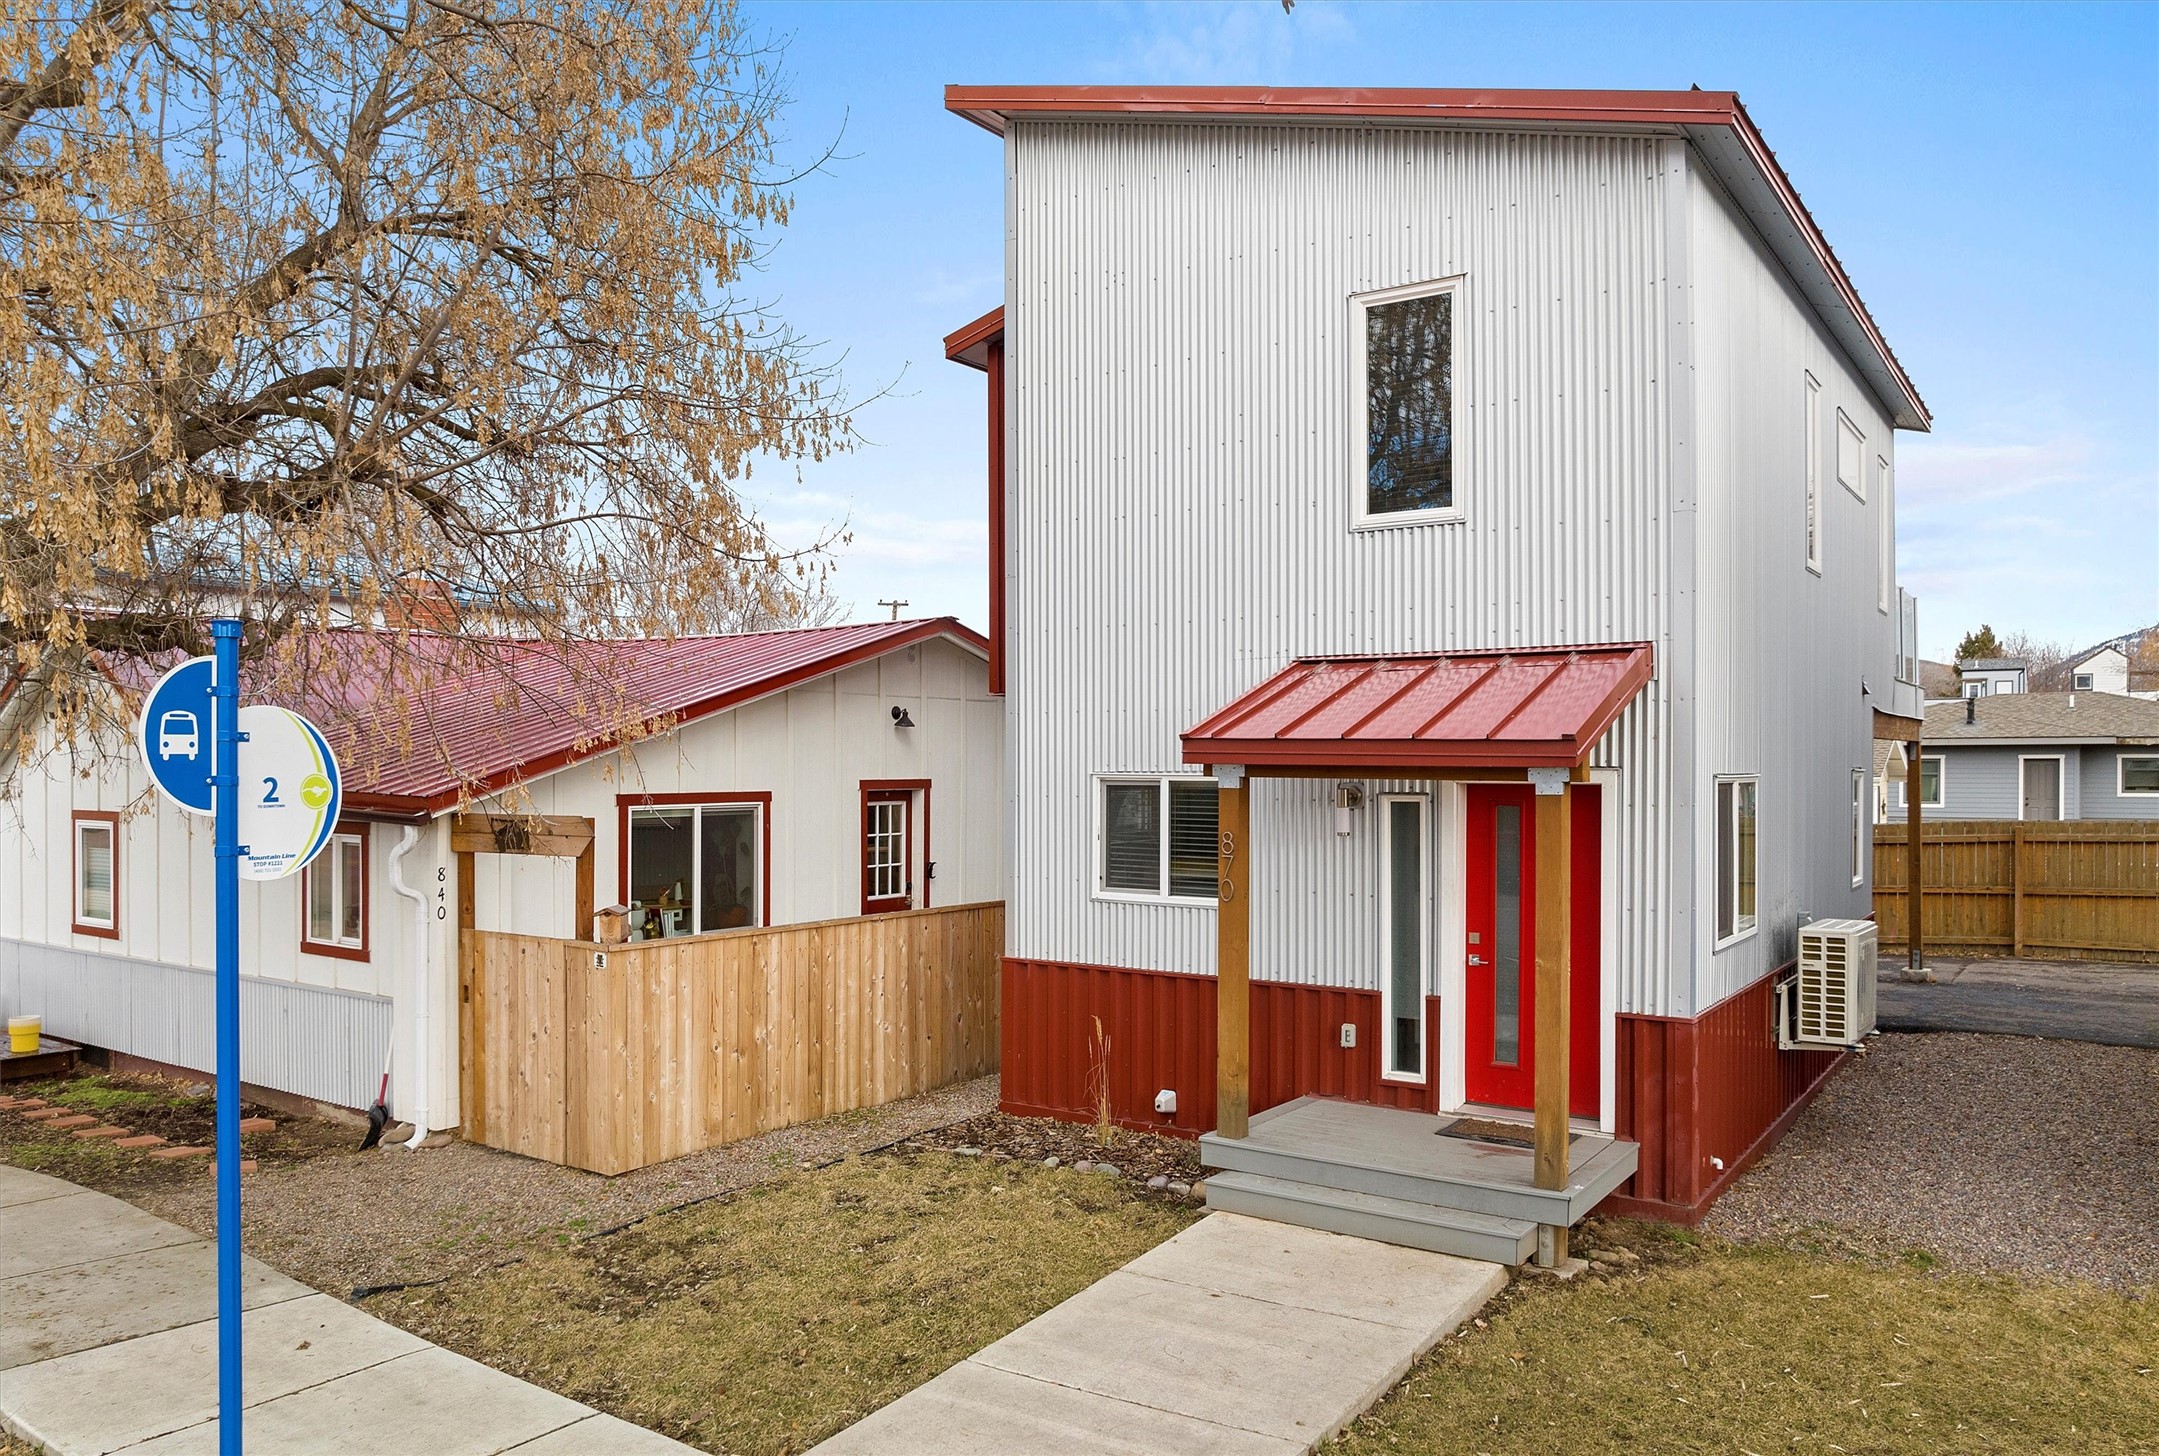 Open House 4/28 1:30-3 PM. Enjoy low-maintenance living in this 2bd/1.5 bath stand-alone home with no shared walls in central Missoula!  The kitchen is beautiful with white quartz counters, tile backsplash, stainless appliances, and a large bar seating area.  The efficient floorpan makes excellent use of the space with a living room and 1/2 bath also located on the main floor.  Upstairs you will find 2 bedrooms and a full bath as well as a generous deck with views to the east and transparent railing to maximize the light and views while you relax on your outdoor deck.  This home was built in 2017 and provides a/c through a brand new mini-split HVAC system installed in 2023.  Low-maintenance metal siding and quality finishes mean you can spend less time maintaining your home and more time enjoying all that Missoula has to offer.  There is even a bus stop right out the front door!  Call Shannon Hilliard at 406-239-8350 or your real estate professional today!